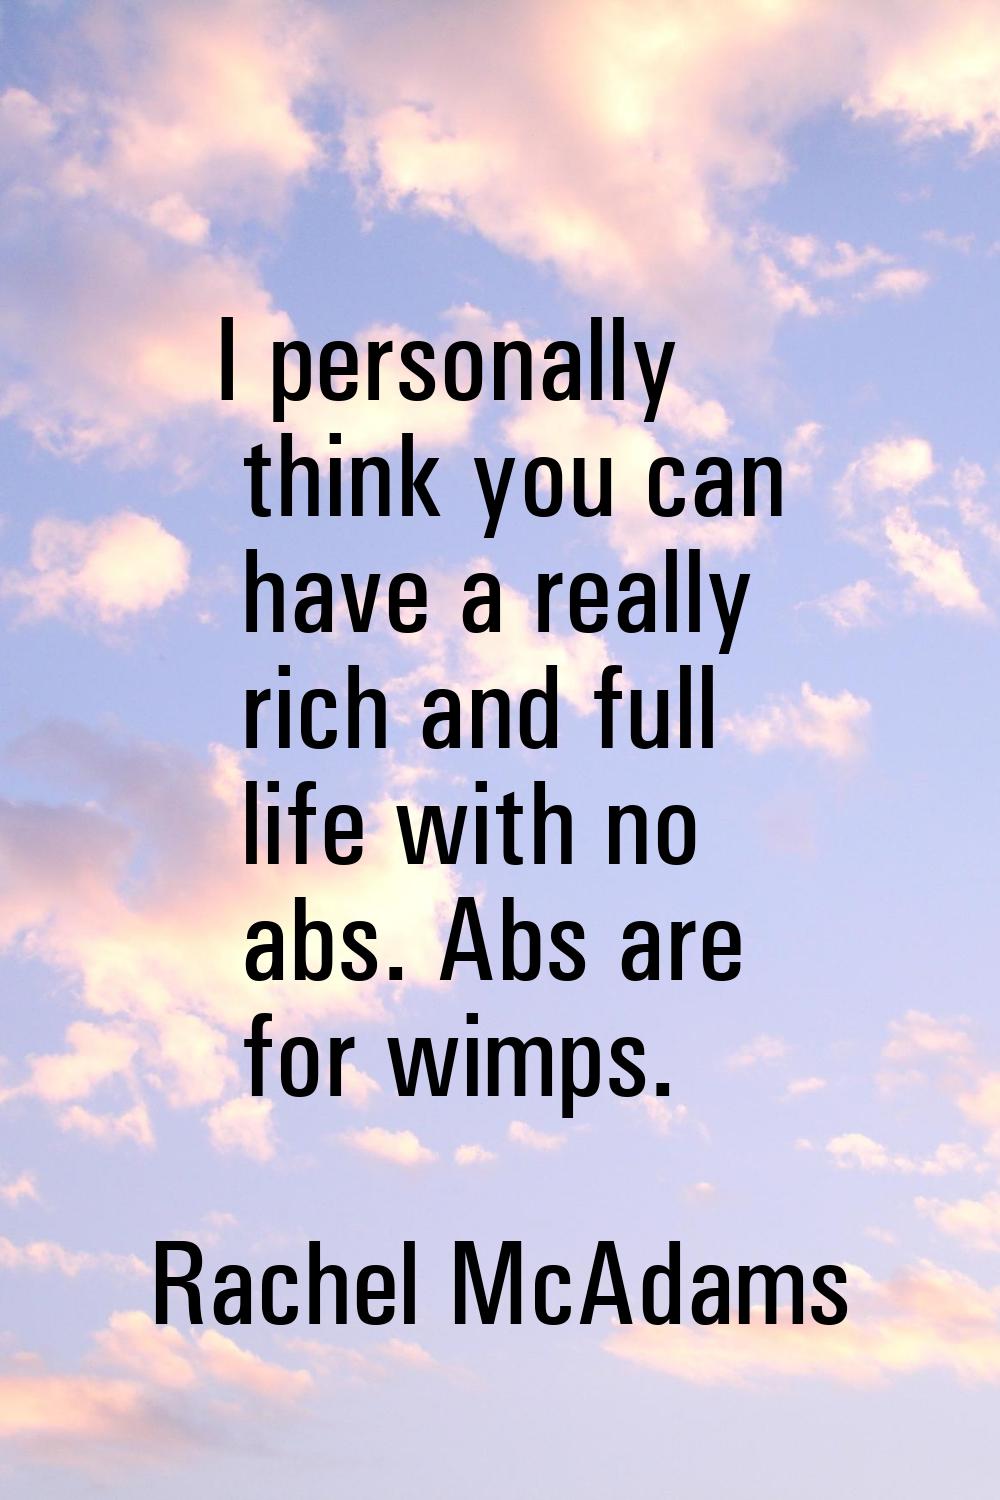 I personally think you can have a really rich and full life with no abs. Abs are for wimps.